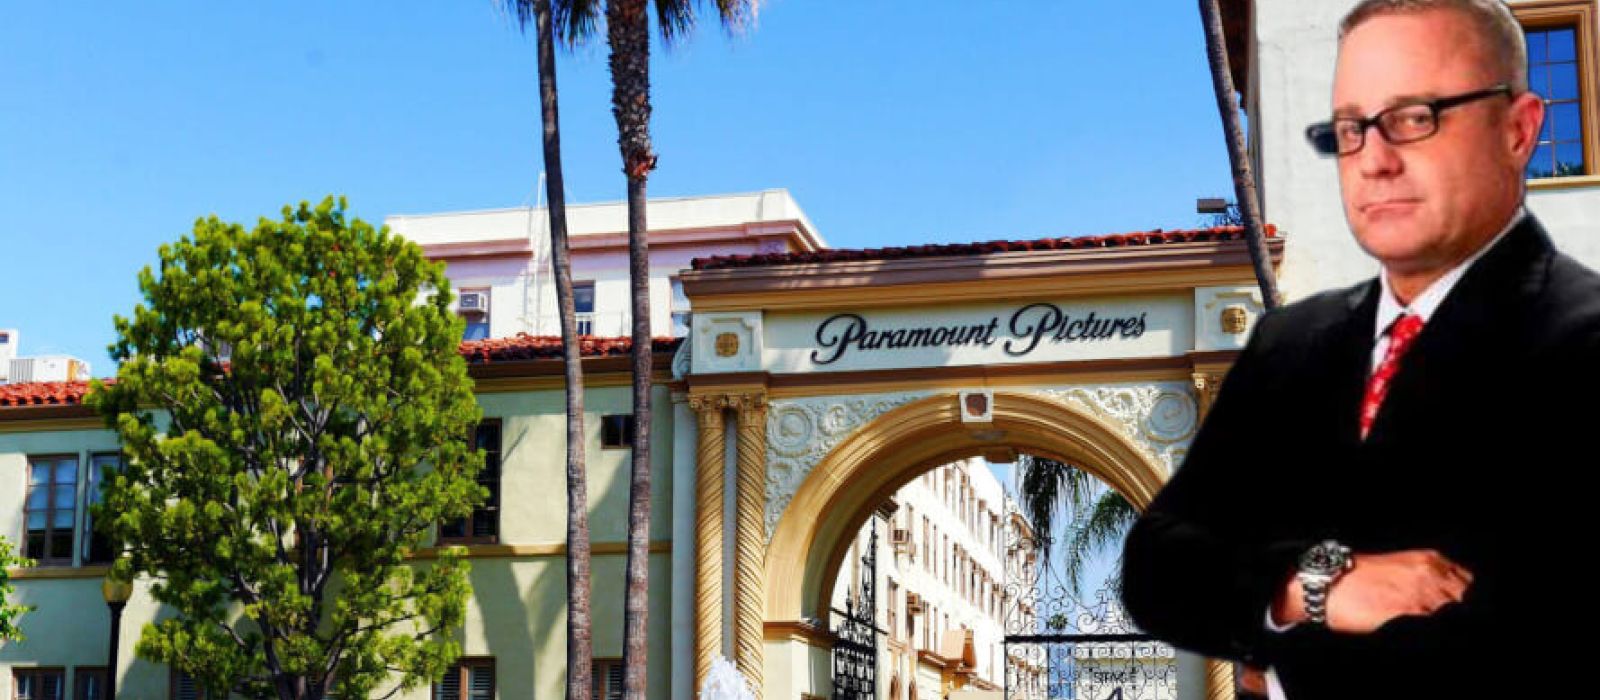 Paramount, CA personal injury lawyer, Michael Ehline, Esq. Proven outcomes.